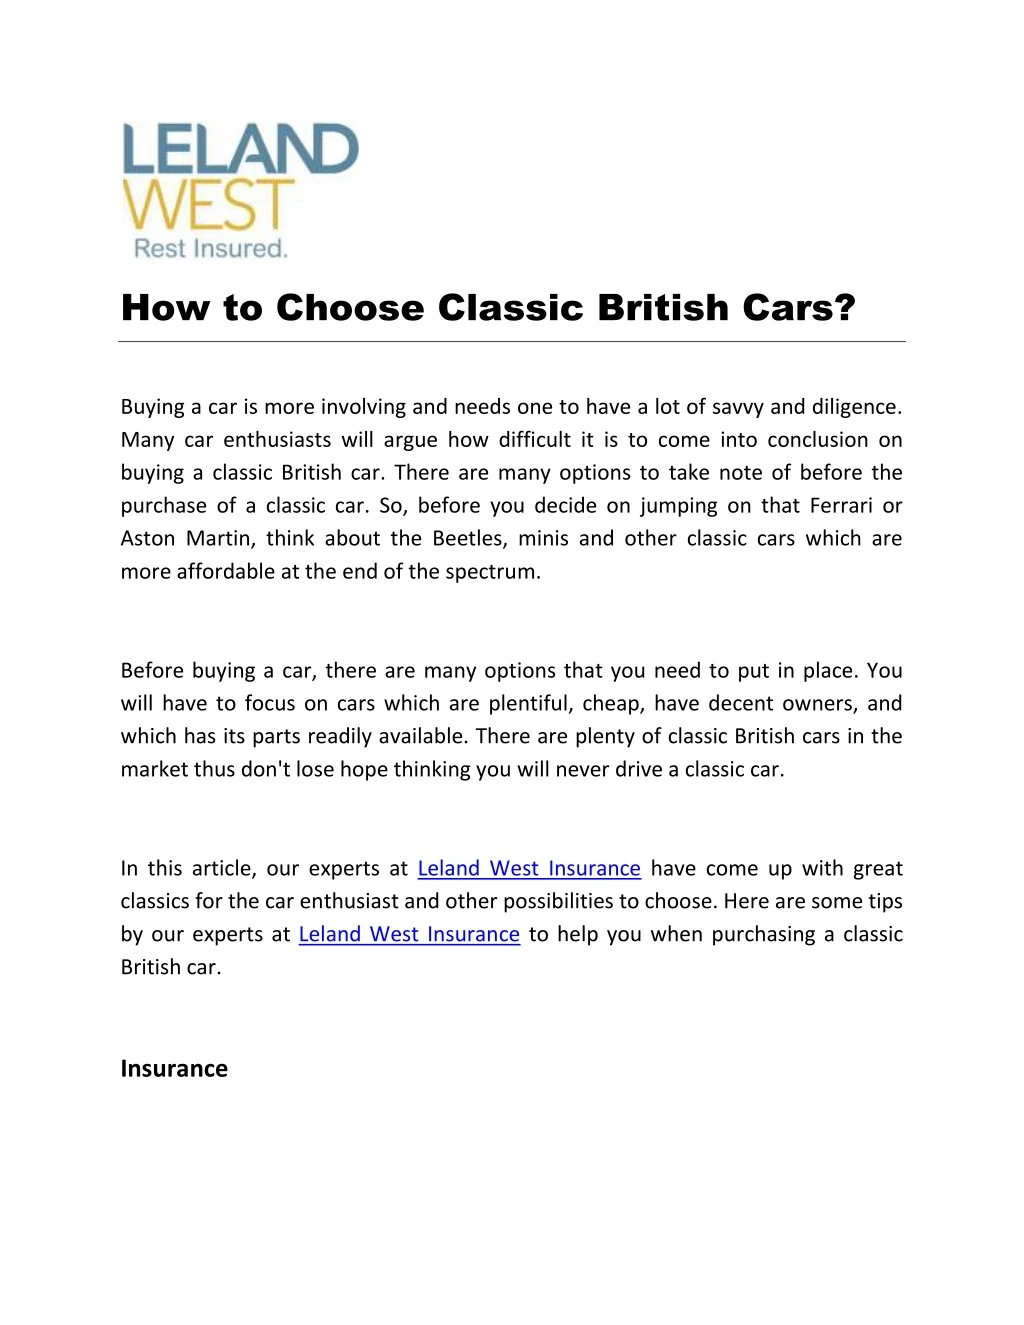 how to choose classic british cars